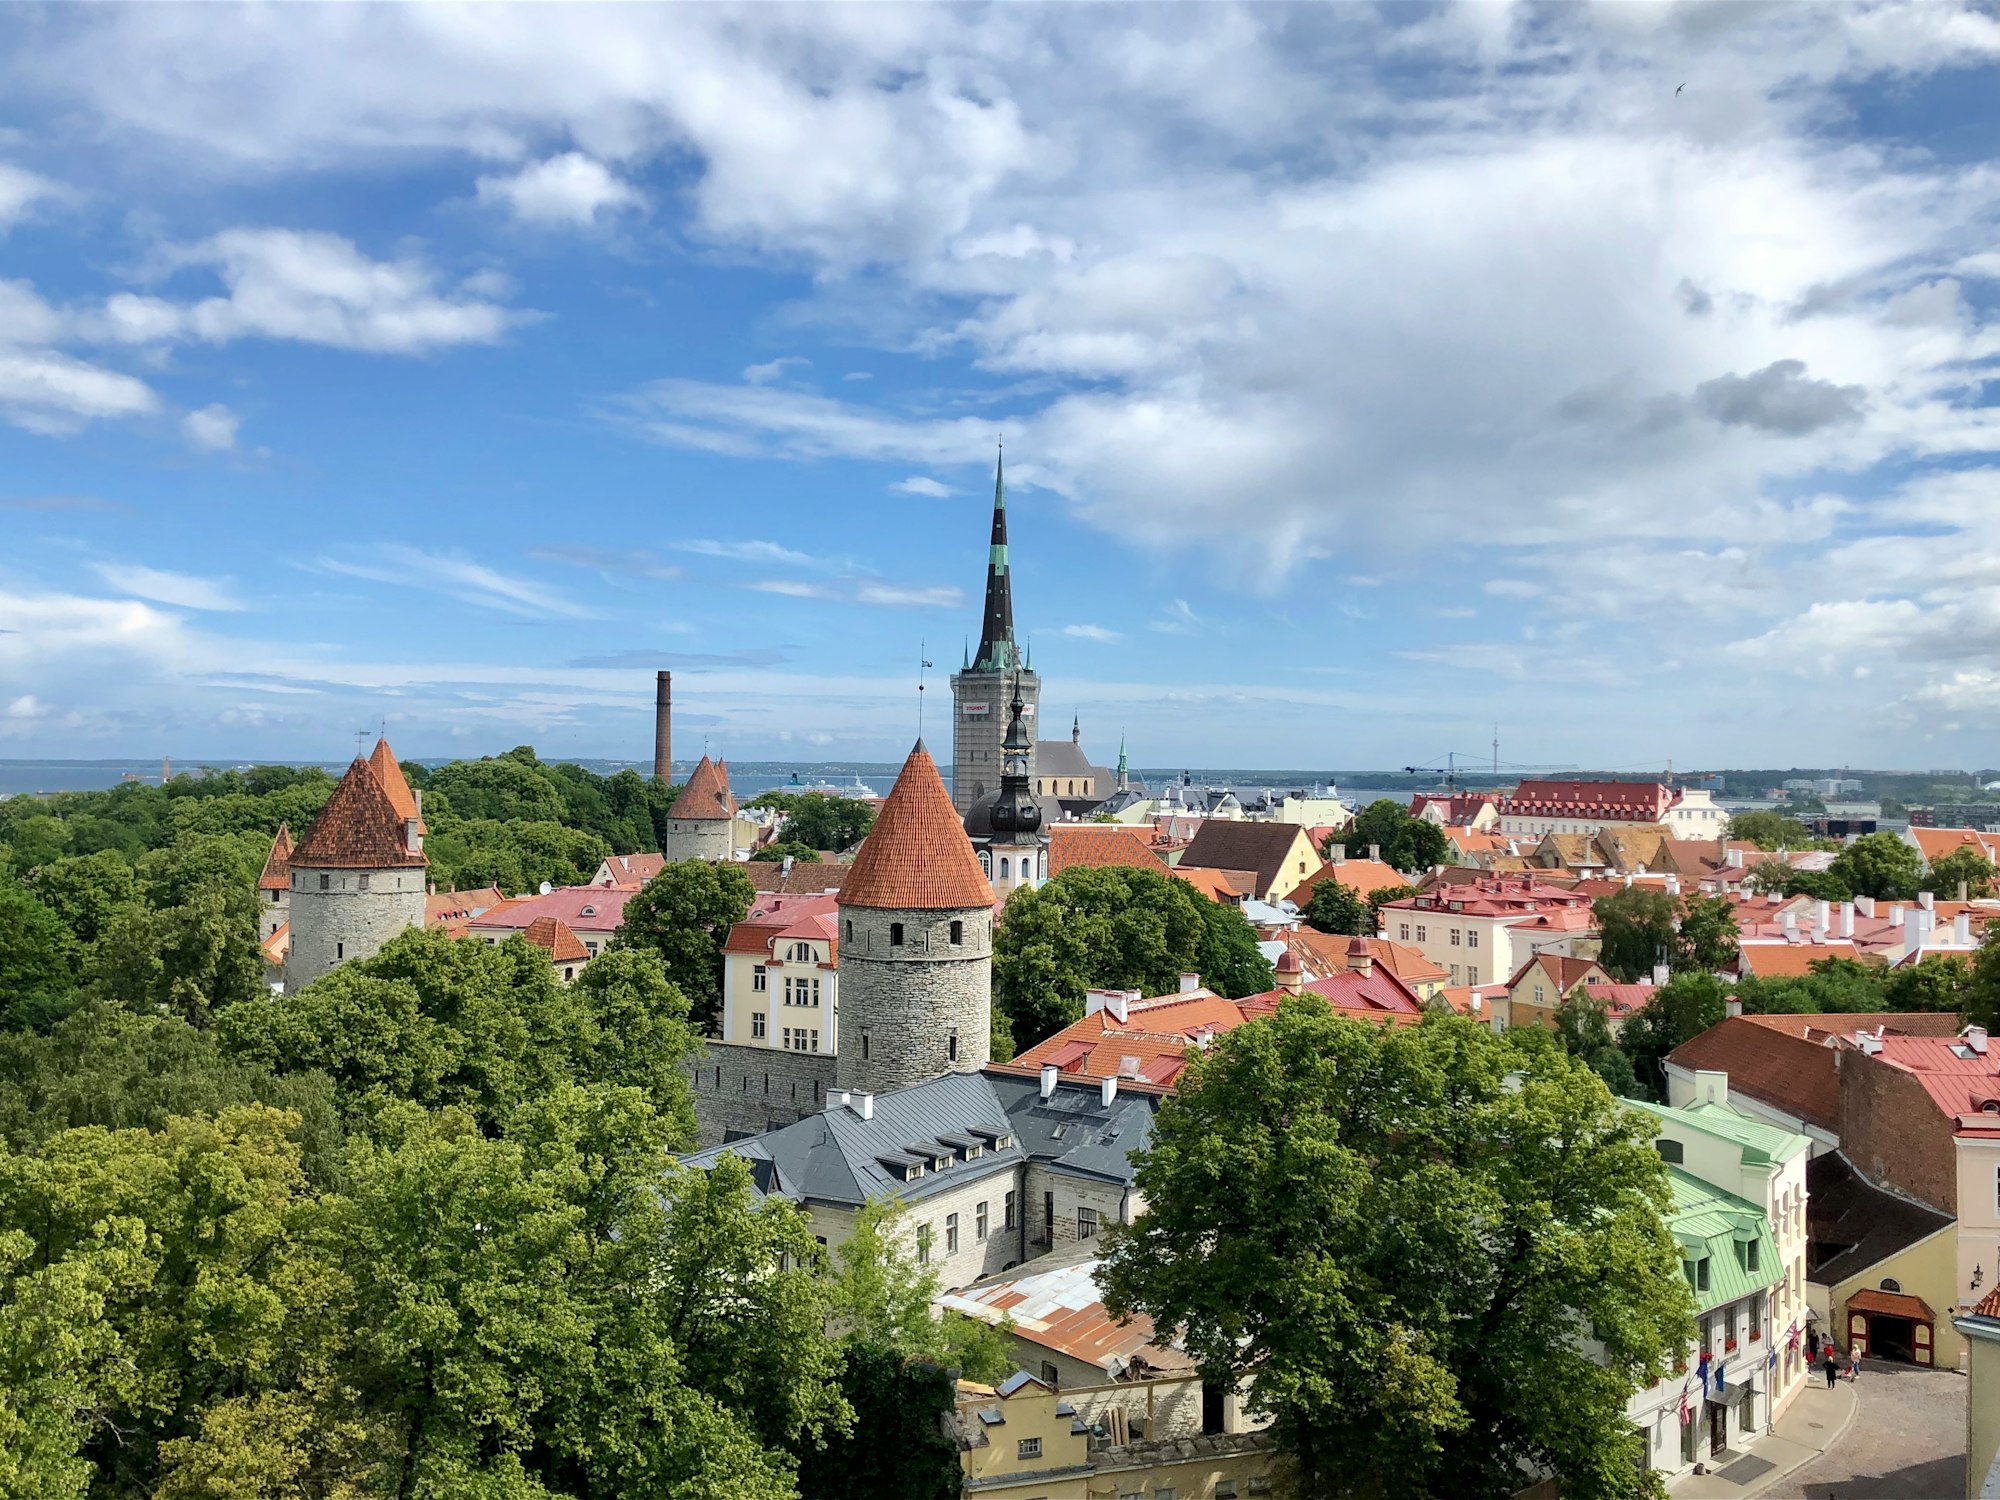 View of the skyline of Old Town Tallinn